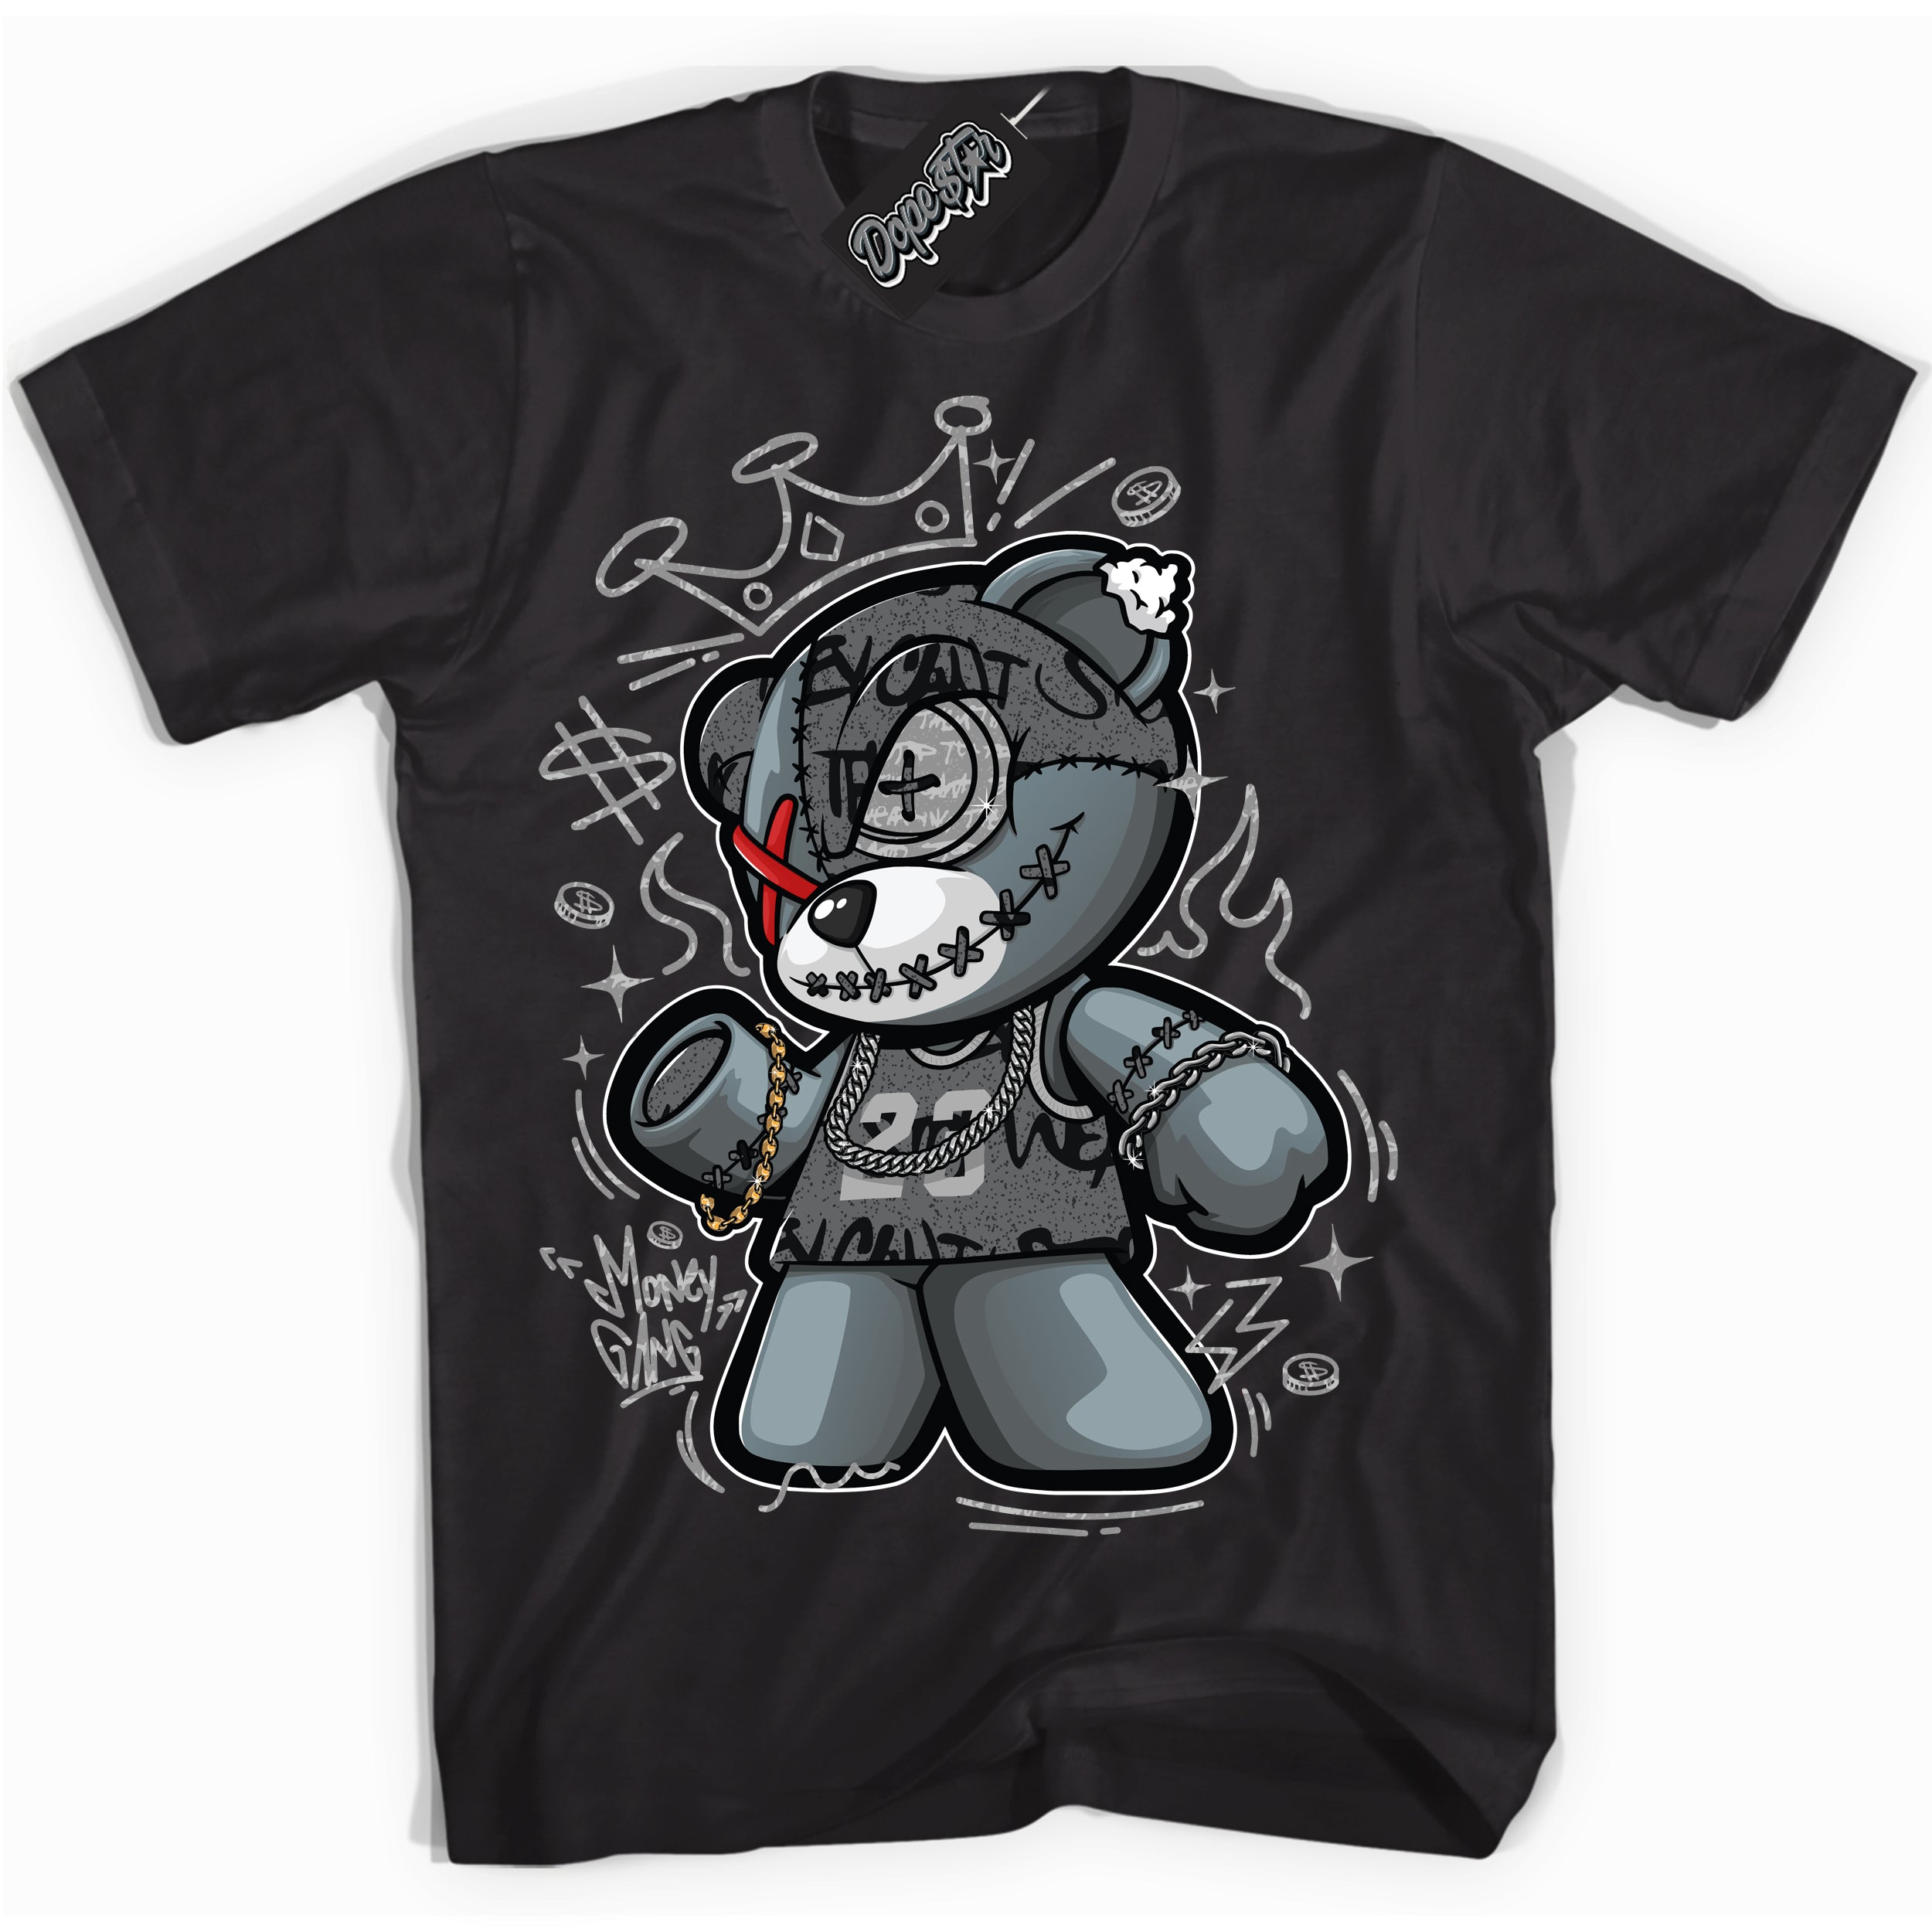 Cool Black Shirt with “ Money Gang Bear ” design that perfectly matches Rebellionaire 1s Sneakers.